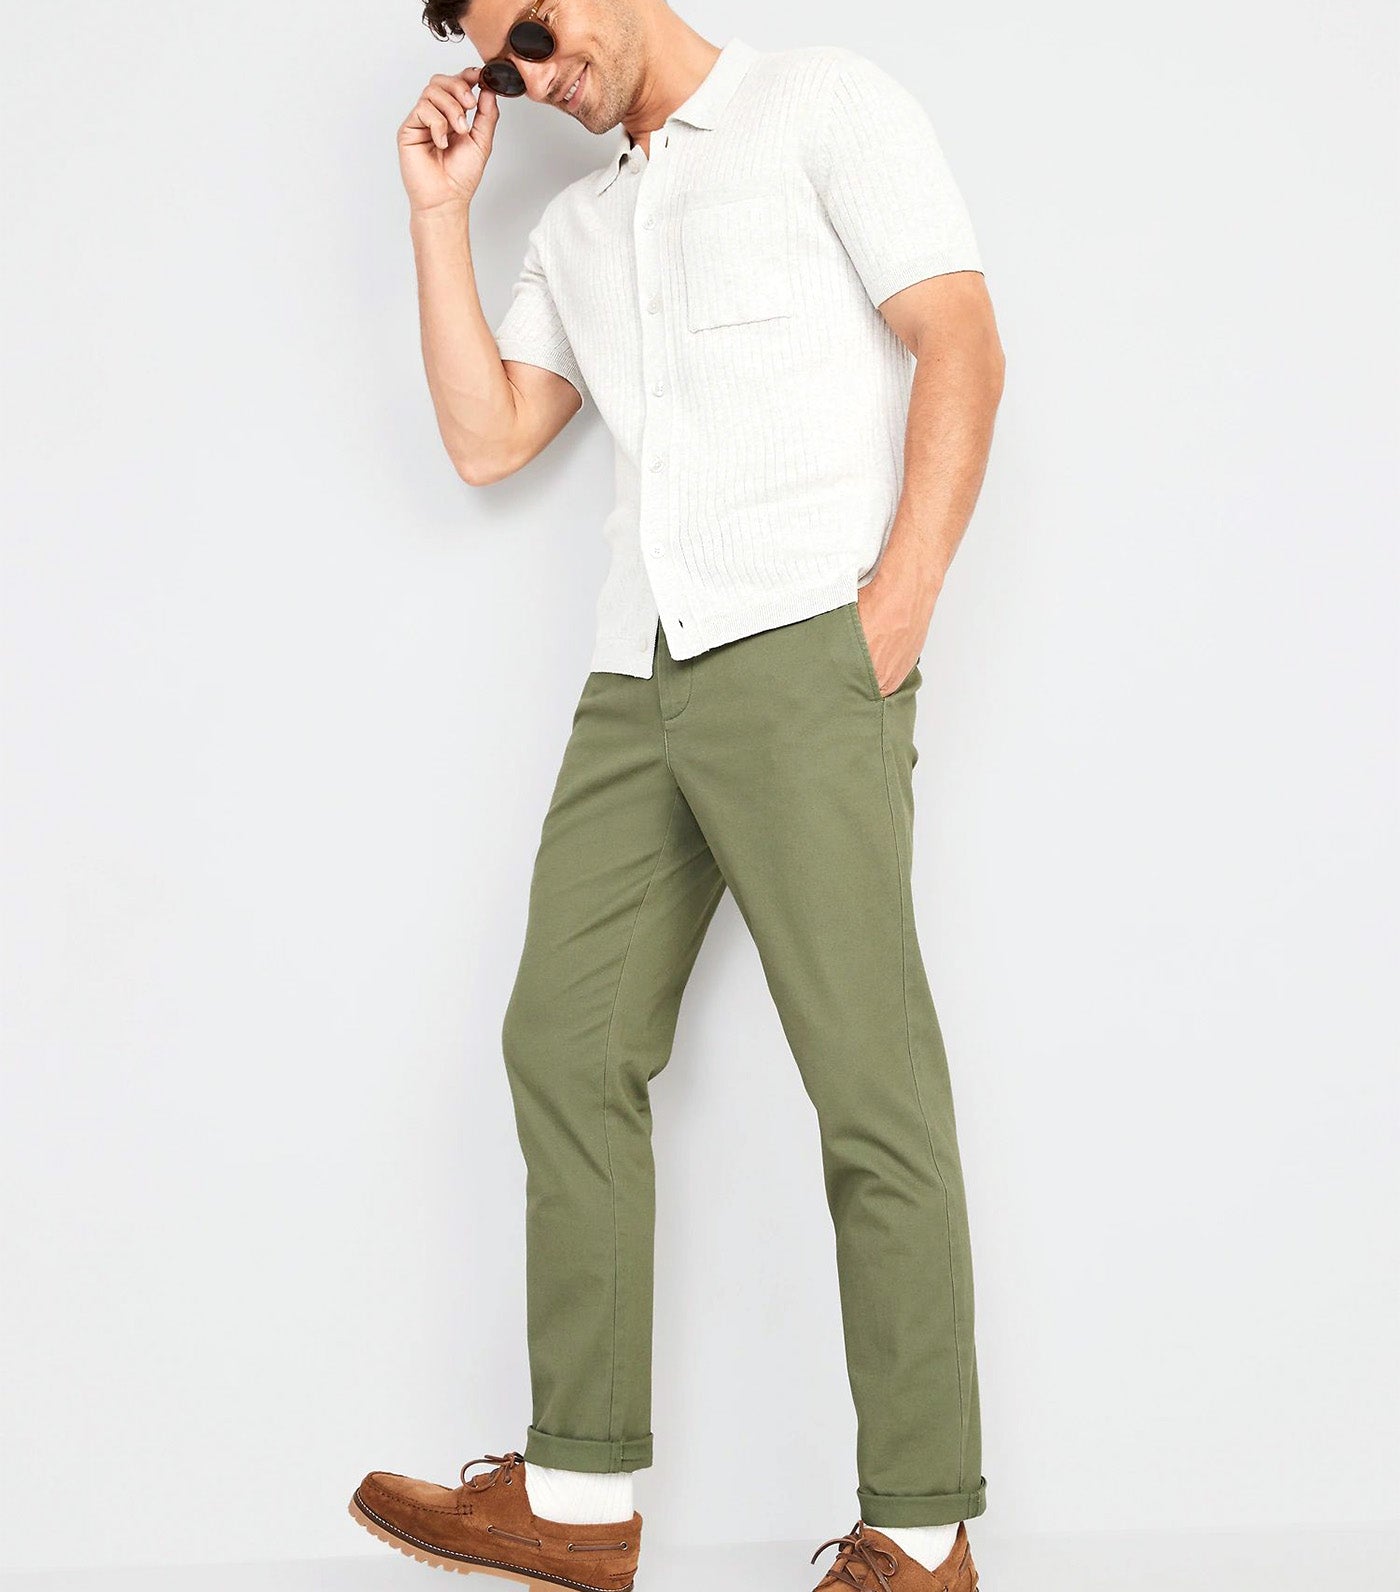 Slim Built-In Flex Rotation Chino Pants for Men Olive Through This